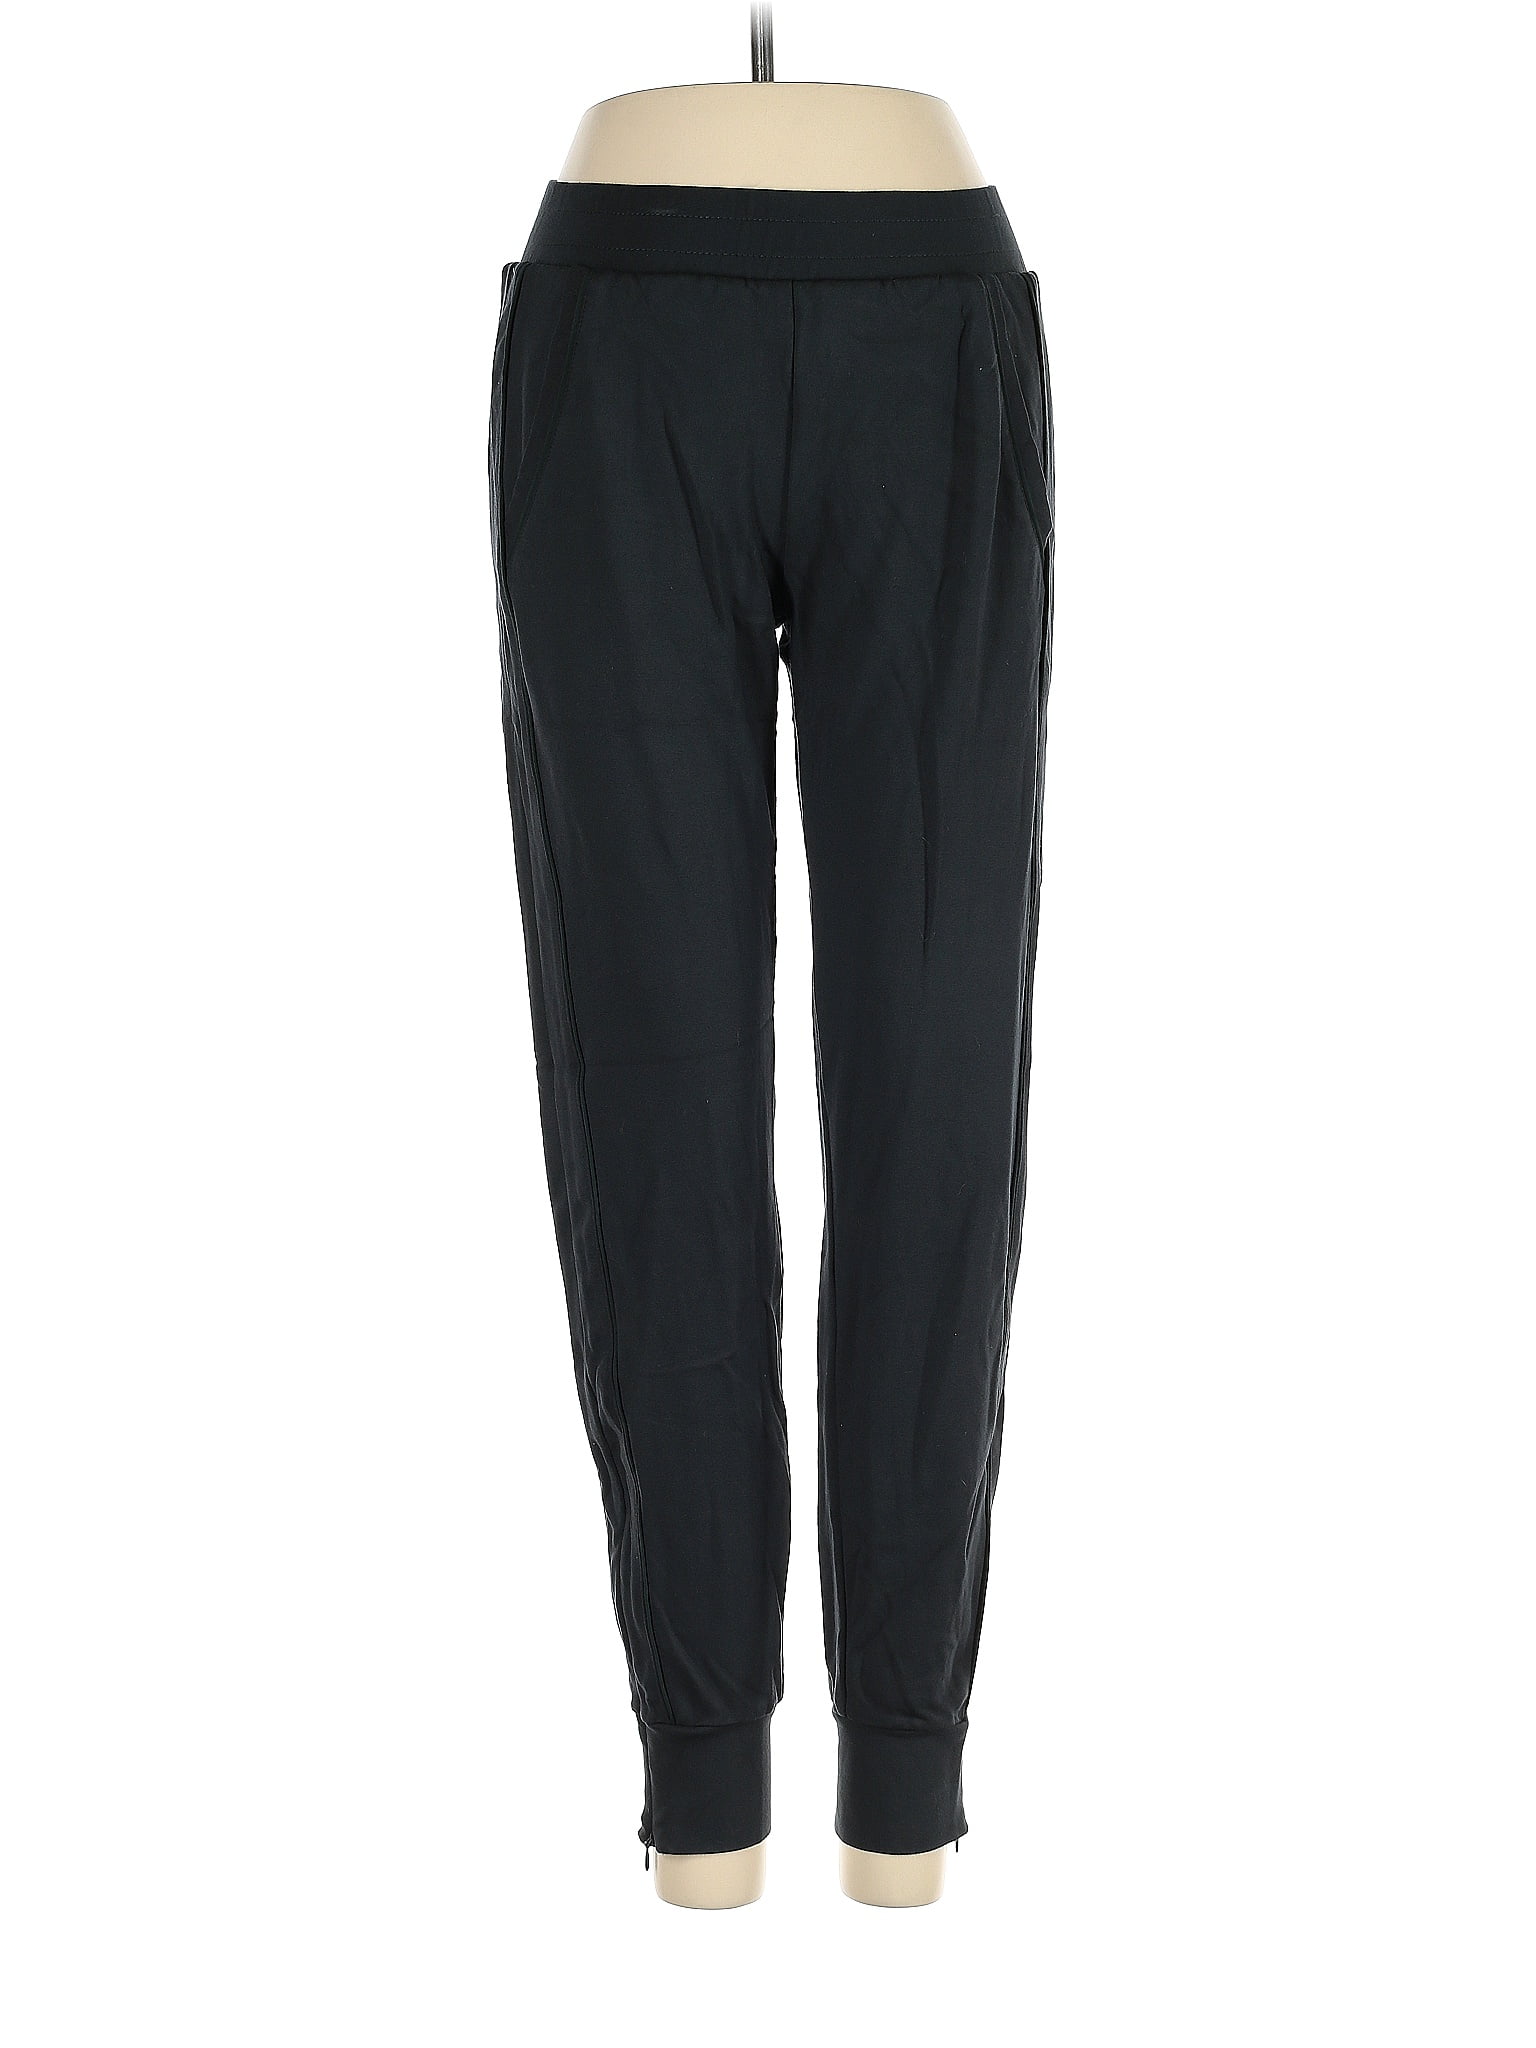 Calia by Carrie Underwood Black Active Pants Size S - 62% off